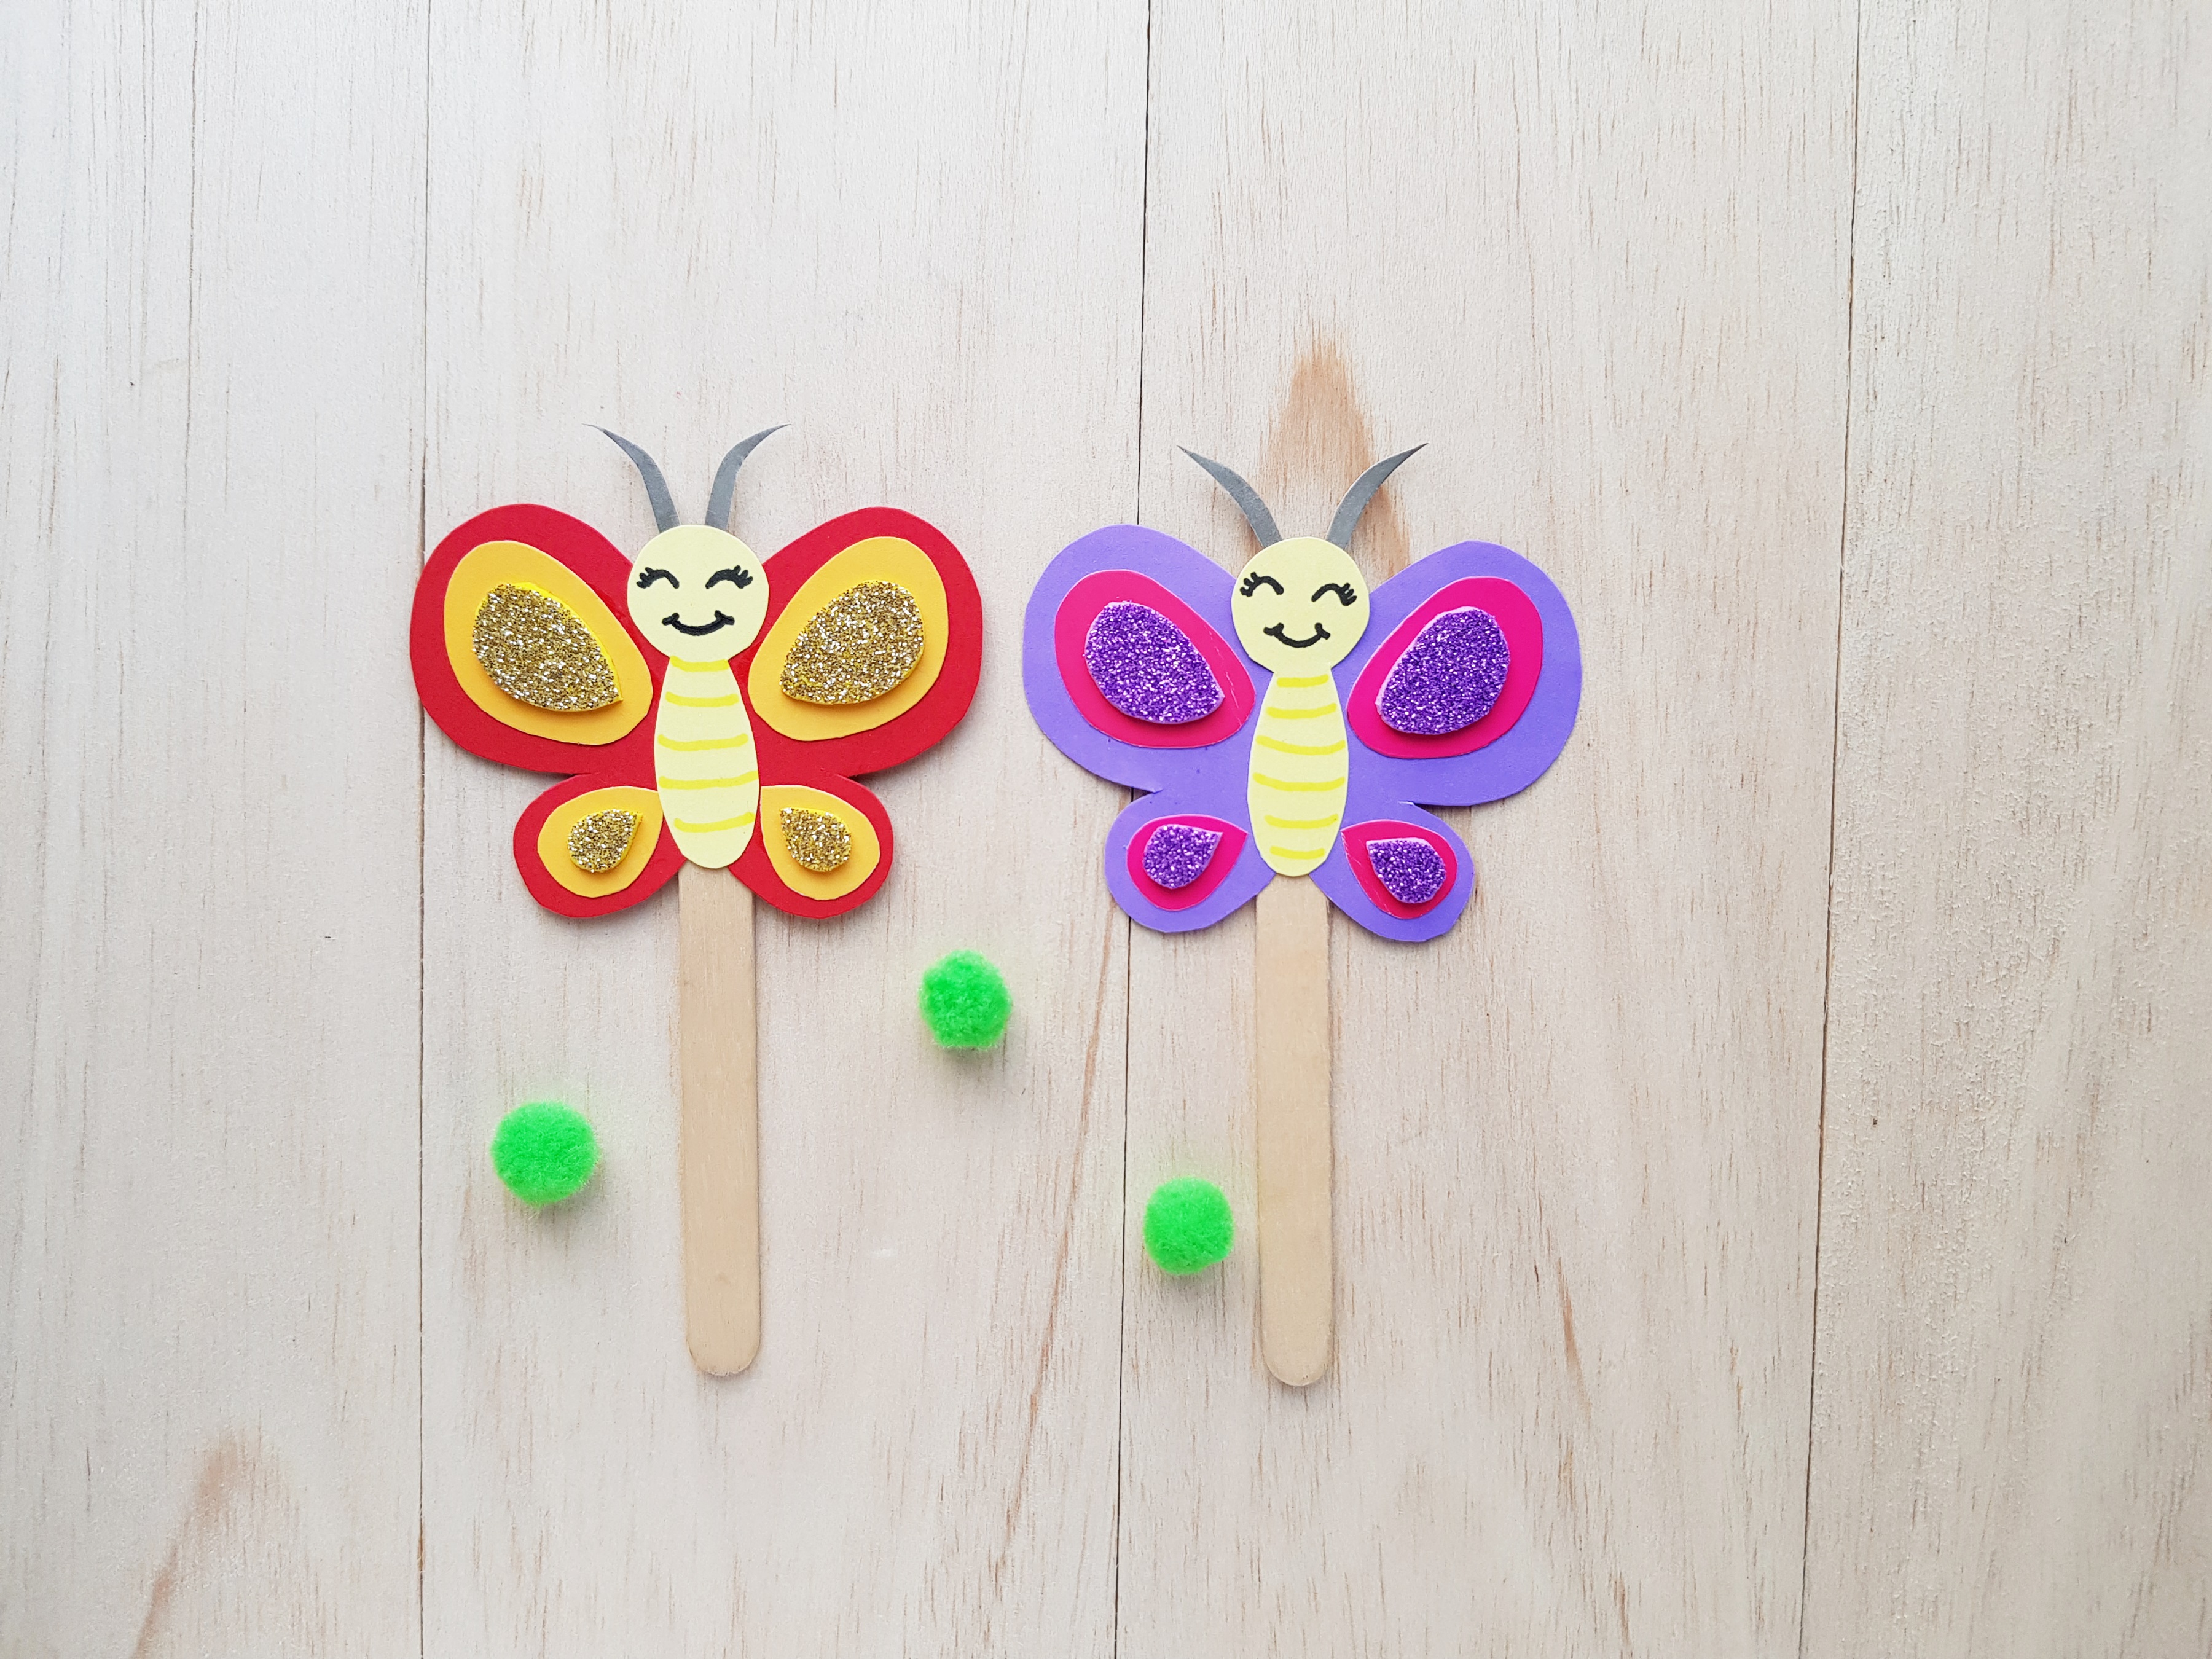 6 Cool Butterfly Crafts For Kids [With Free Templates]